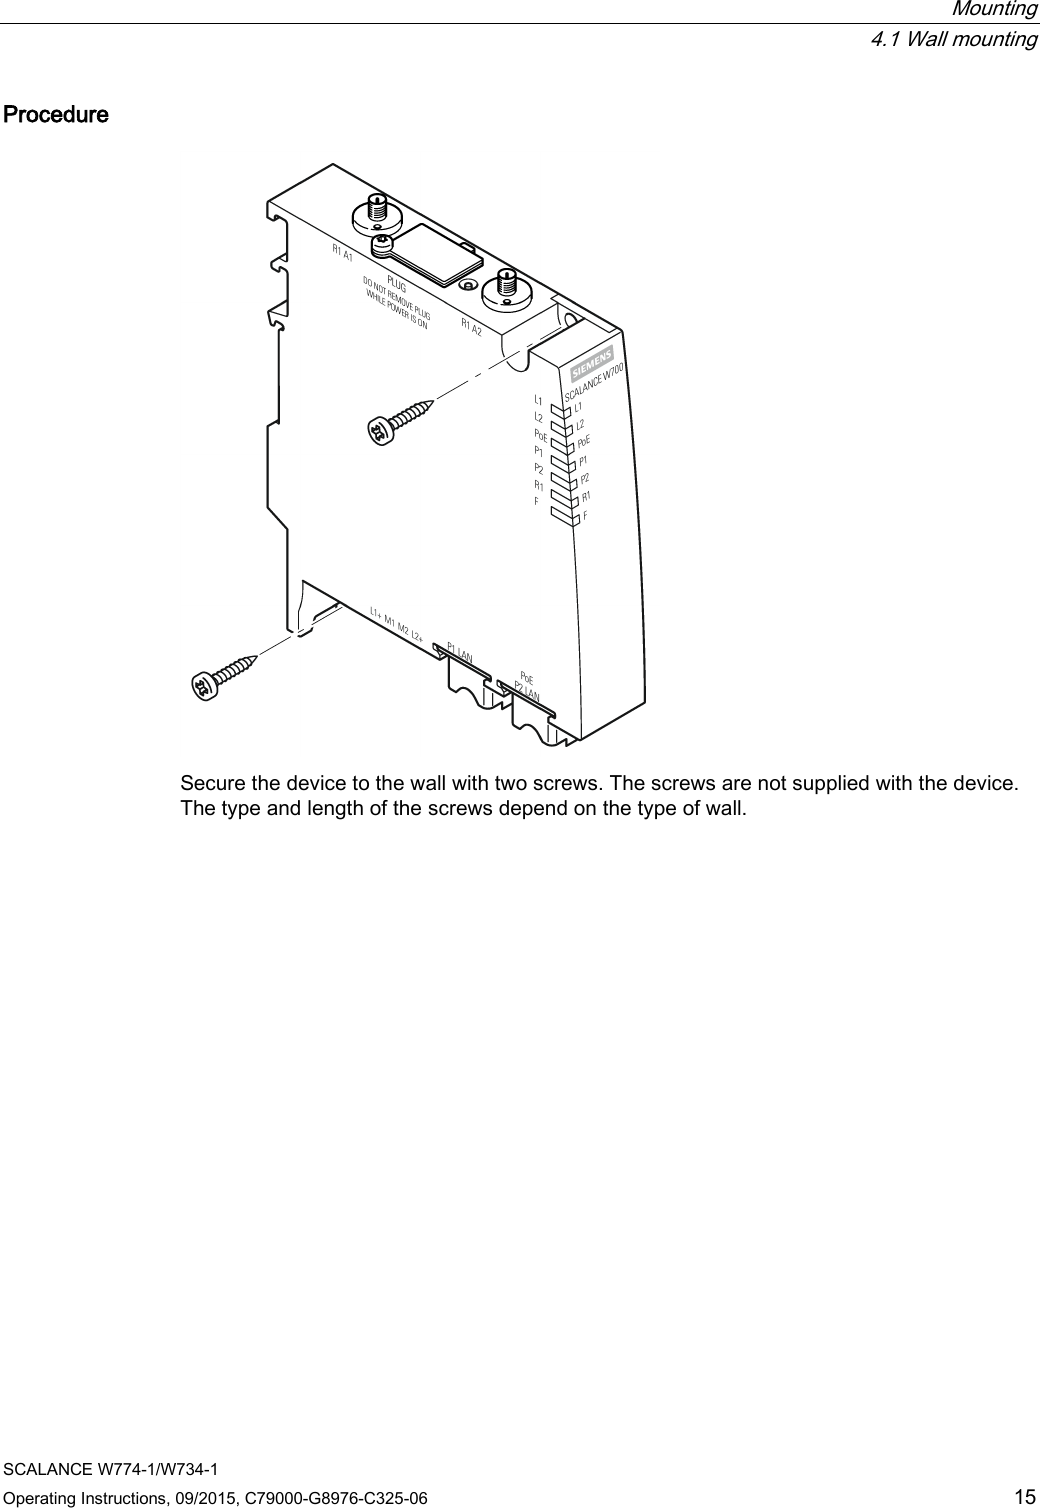  Mounting  4.1 Wall mounting SCALANCE W774-1/W734-1 Operating Instructions, 09/2015, C79000-G8976-C325-06 15 Procedure  Secure the device to the wall with two screws. The screws are not supplied with the device. The type and length of the screws depend on the type of wall.  